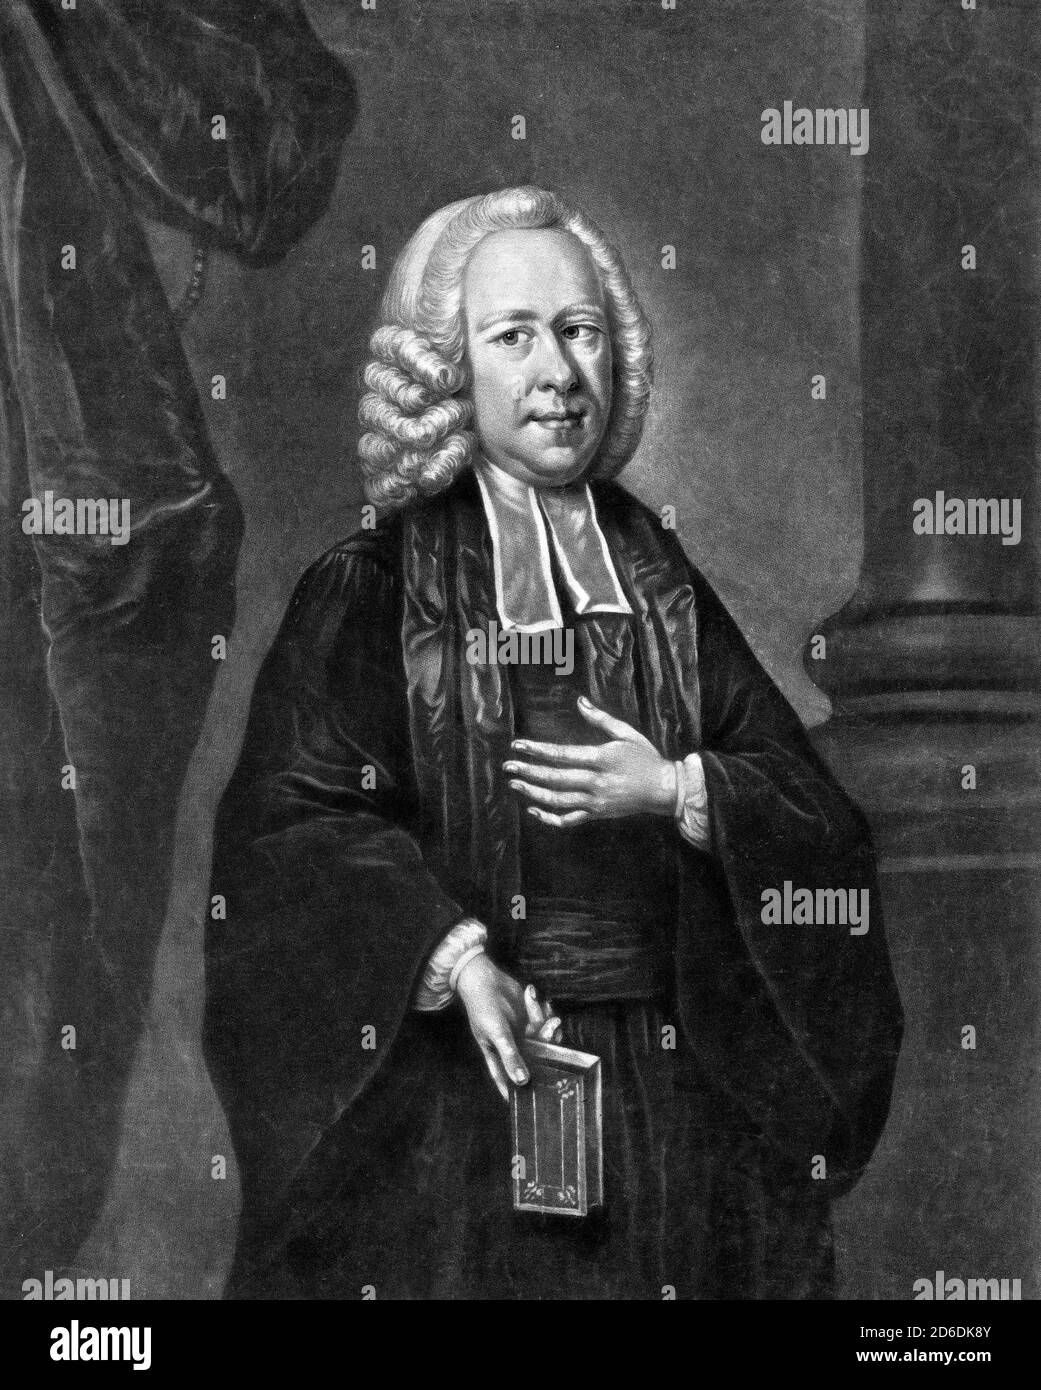 George Whitefield. Portrait of the English Anglican cleric, Reverend George Whitefield (1714-1770), mezzotint by James Moore, 1751. Whitefield was one of the founders of Methodism and the evangelical movement. Stock Photo